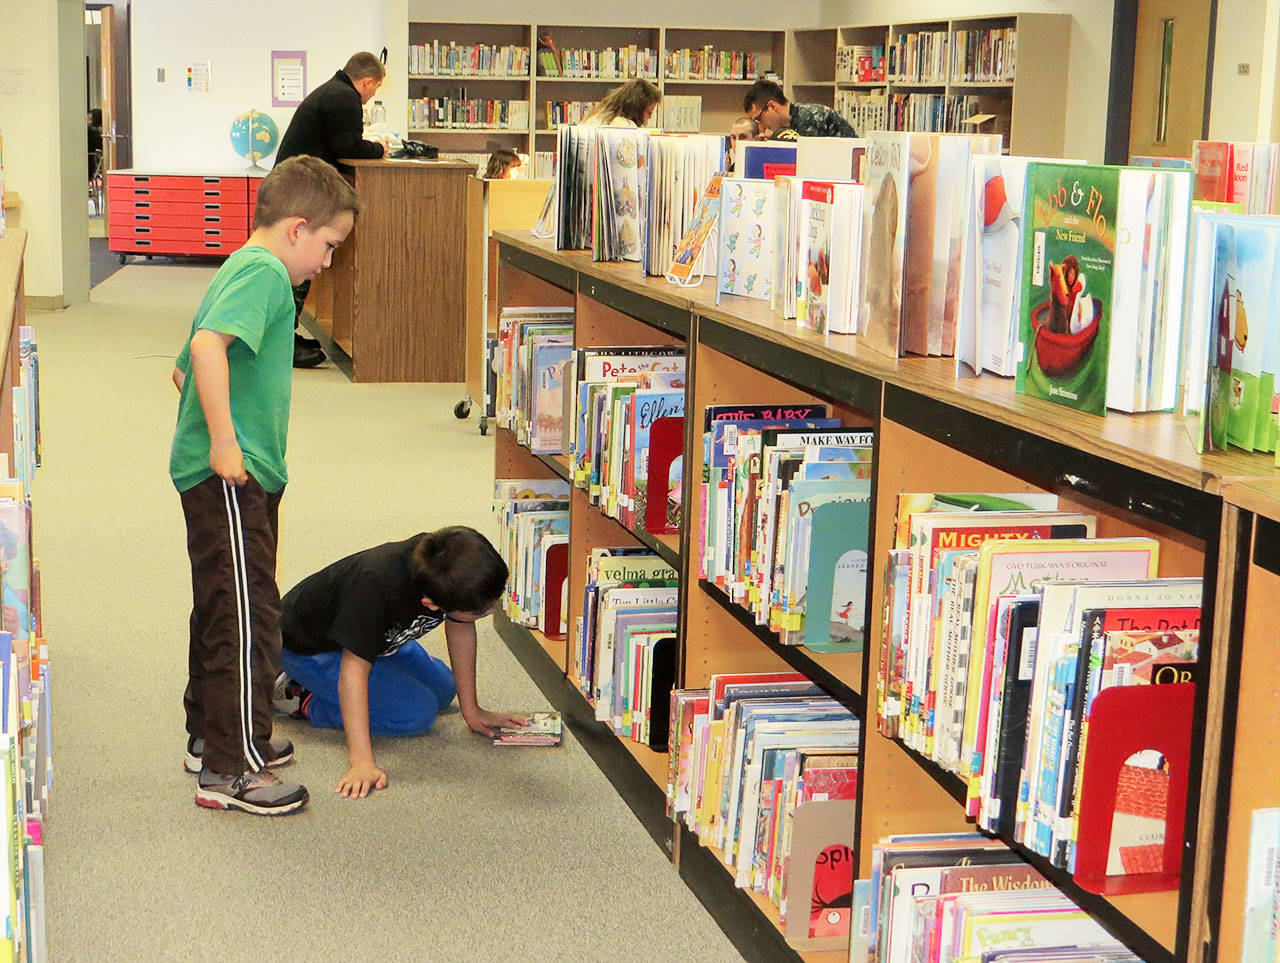 Casey Cook, left, and a fellow Crescent Harbor Elementary student peruse the books at the school’s library. According to school librarian Bill Montross, 98 percent of the library’s approximate 14,000 offerings are included in the Accelerated Reader program. Photo provided